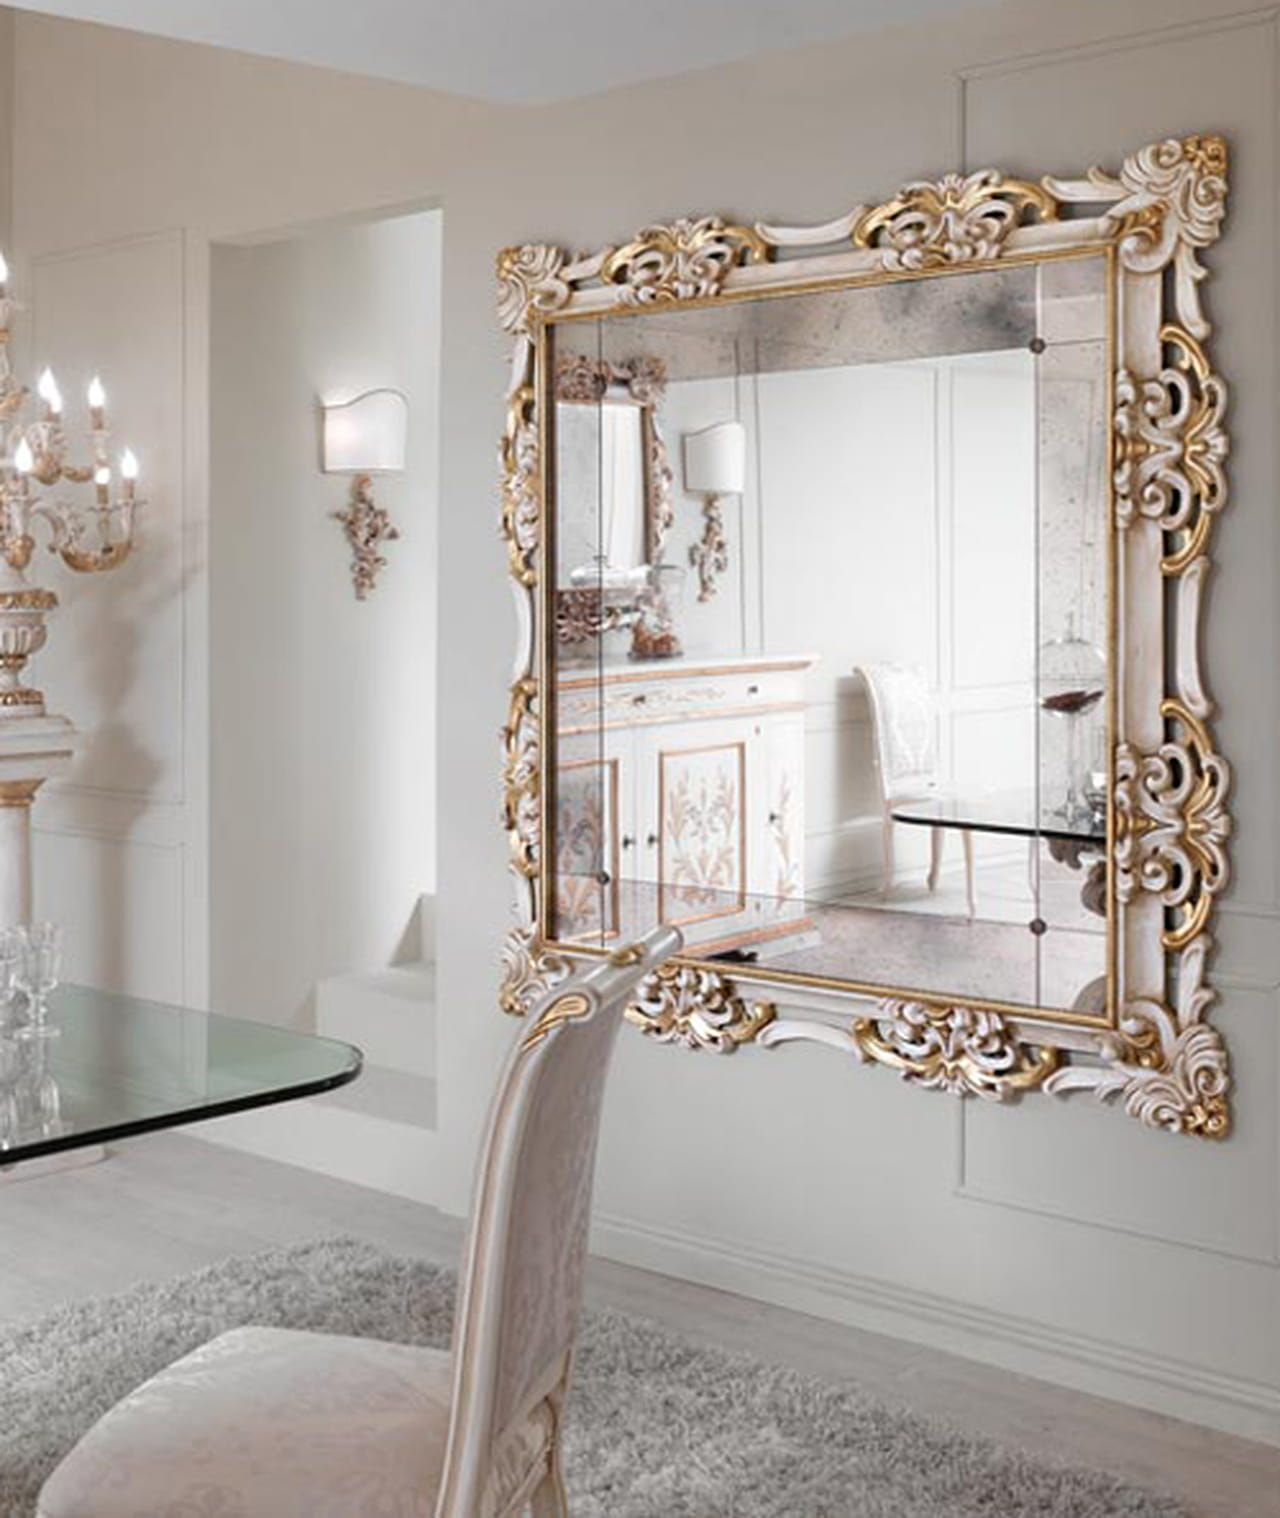 Large Living Room Mirrors Visualhunt, Large Giant Wall Mirror